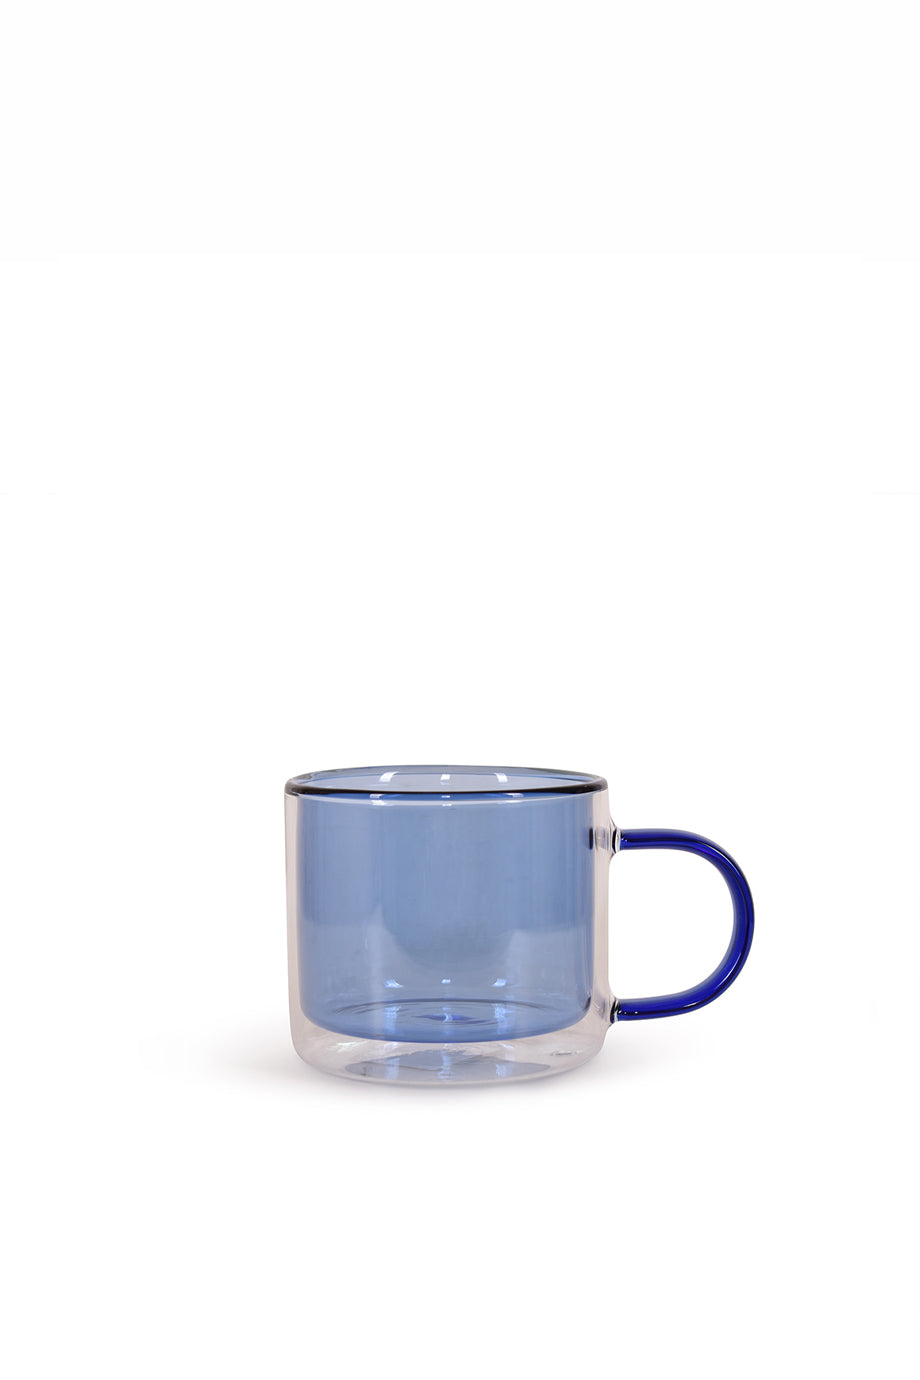 Husk Trouble Cup - Blue